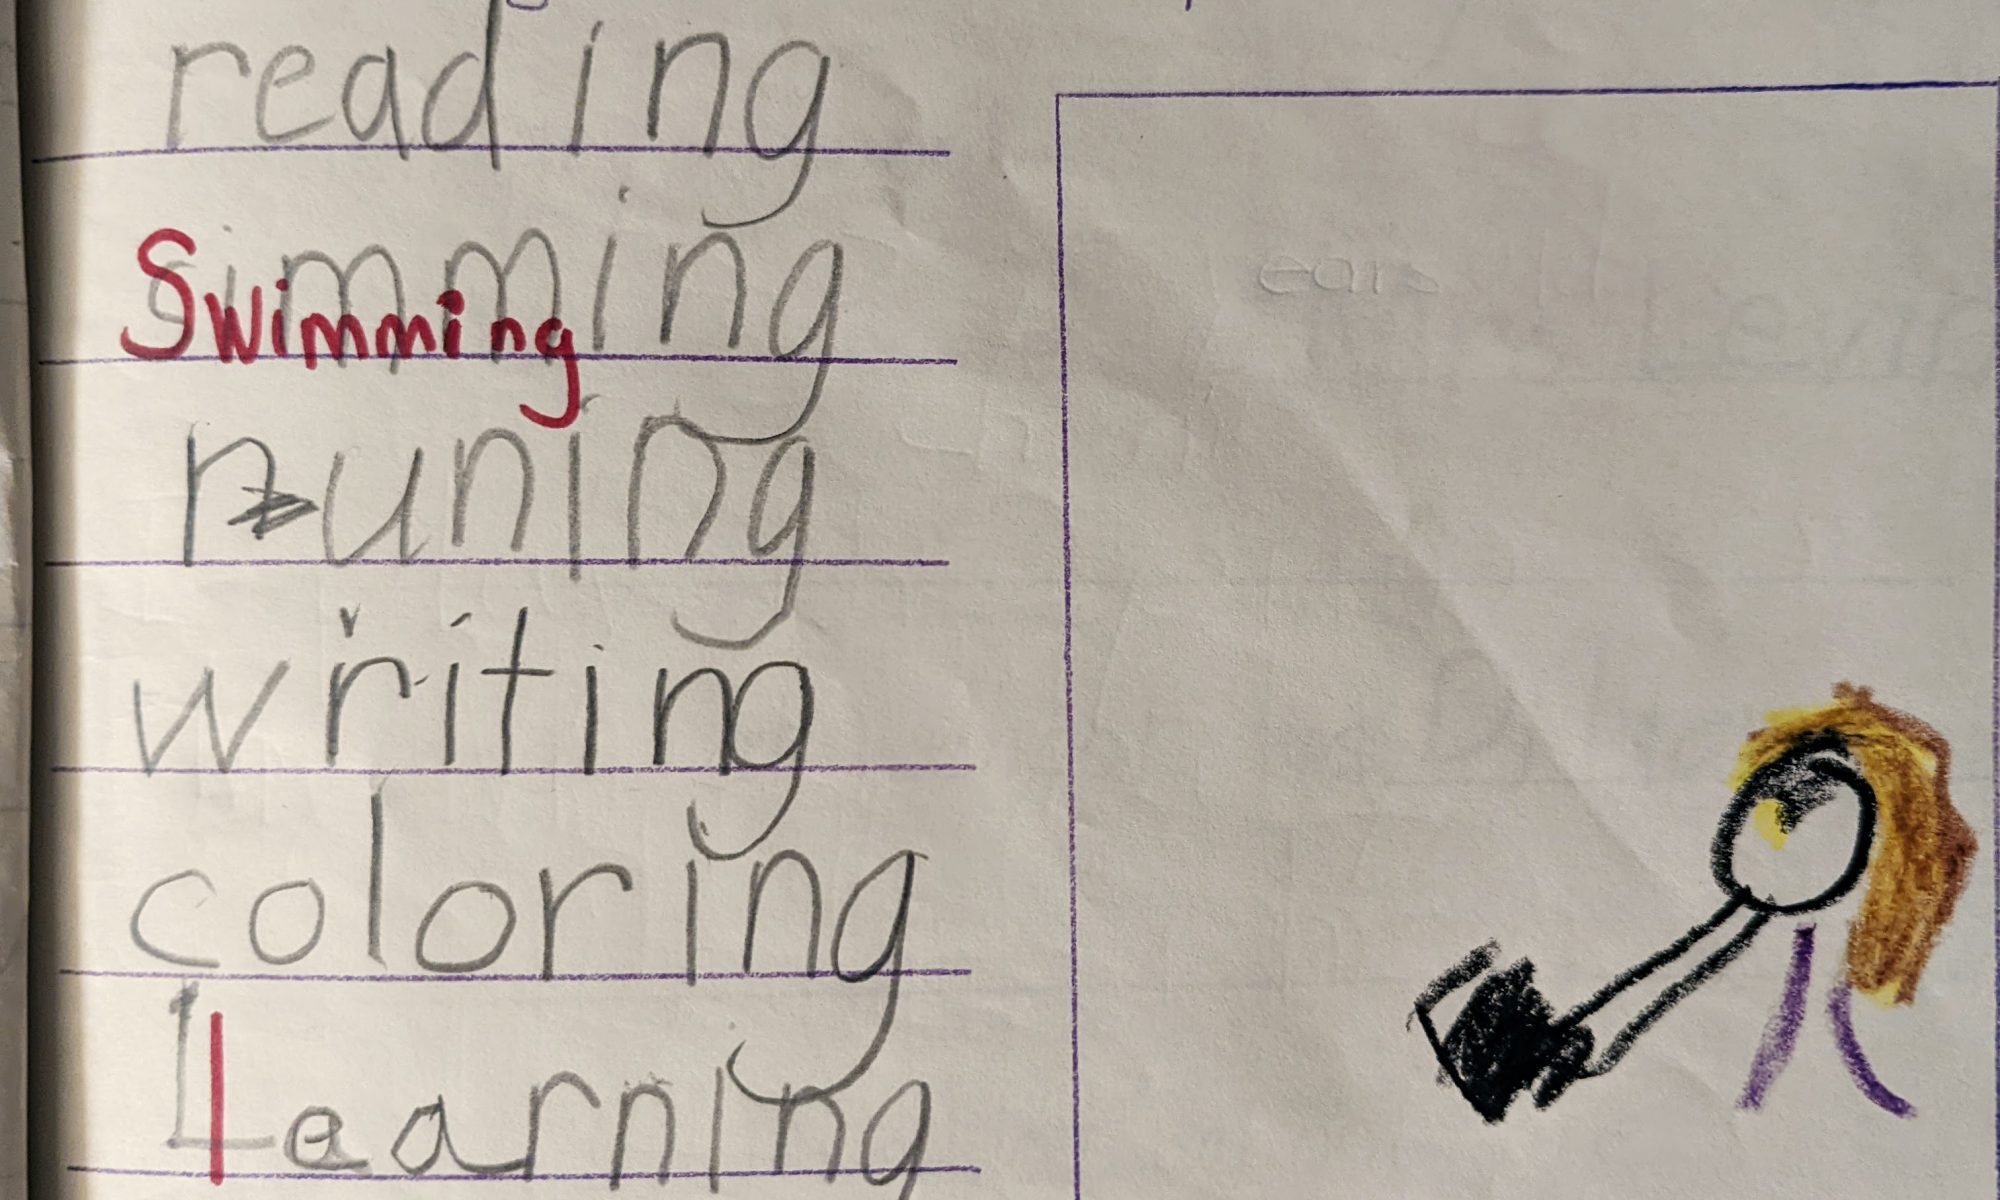 A picture of a kindergarten assignment. The top reads, Some things I can do very well are. The responses are written thusly: reading, swimming, runing, writing, coloring, learning. To the right a stick figure holds a black box which presumably is a book.